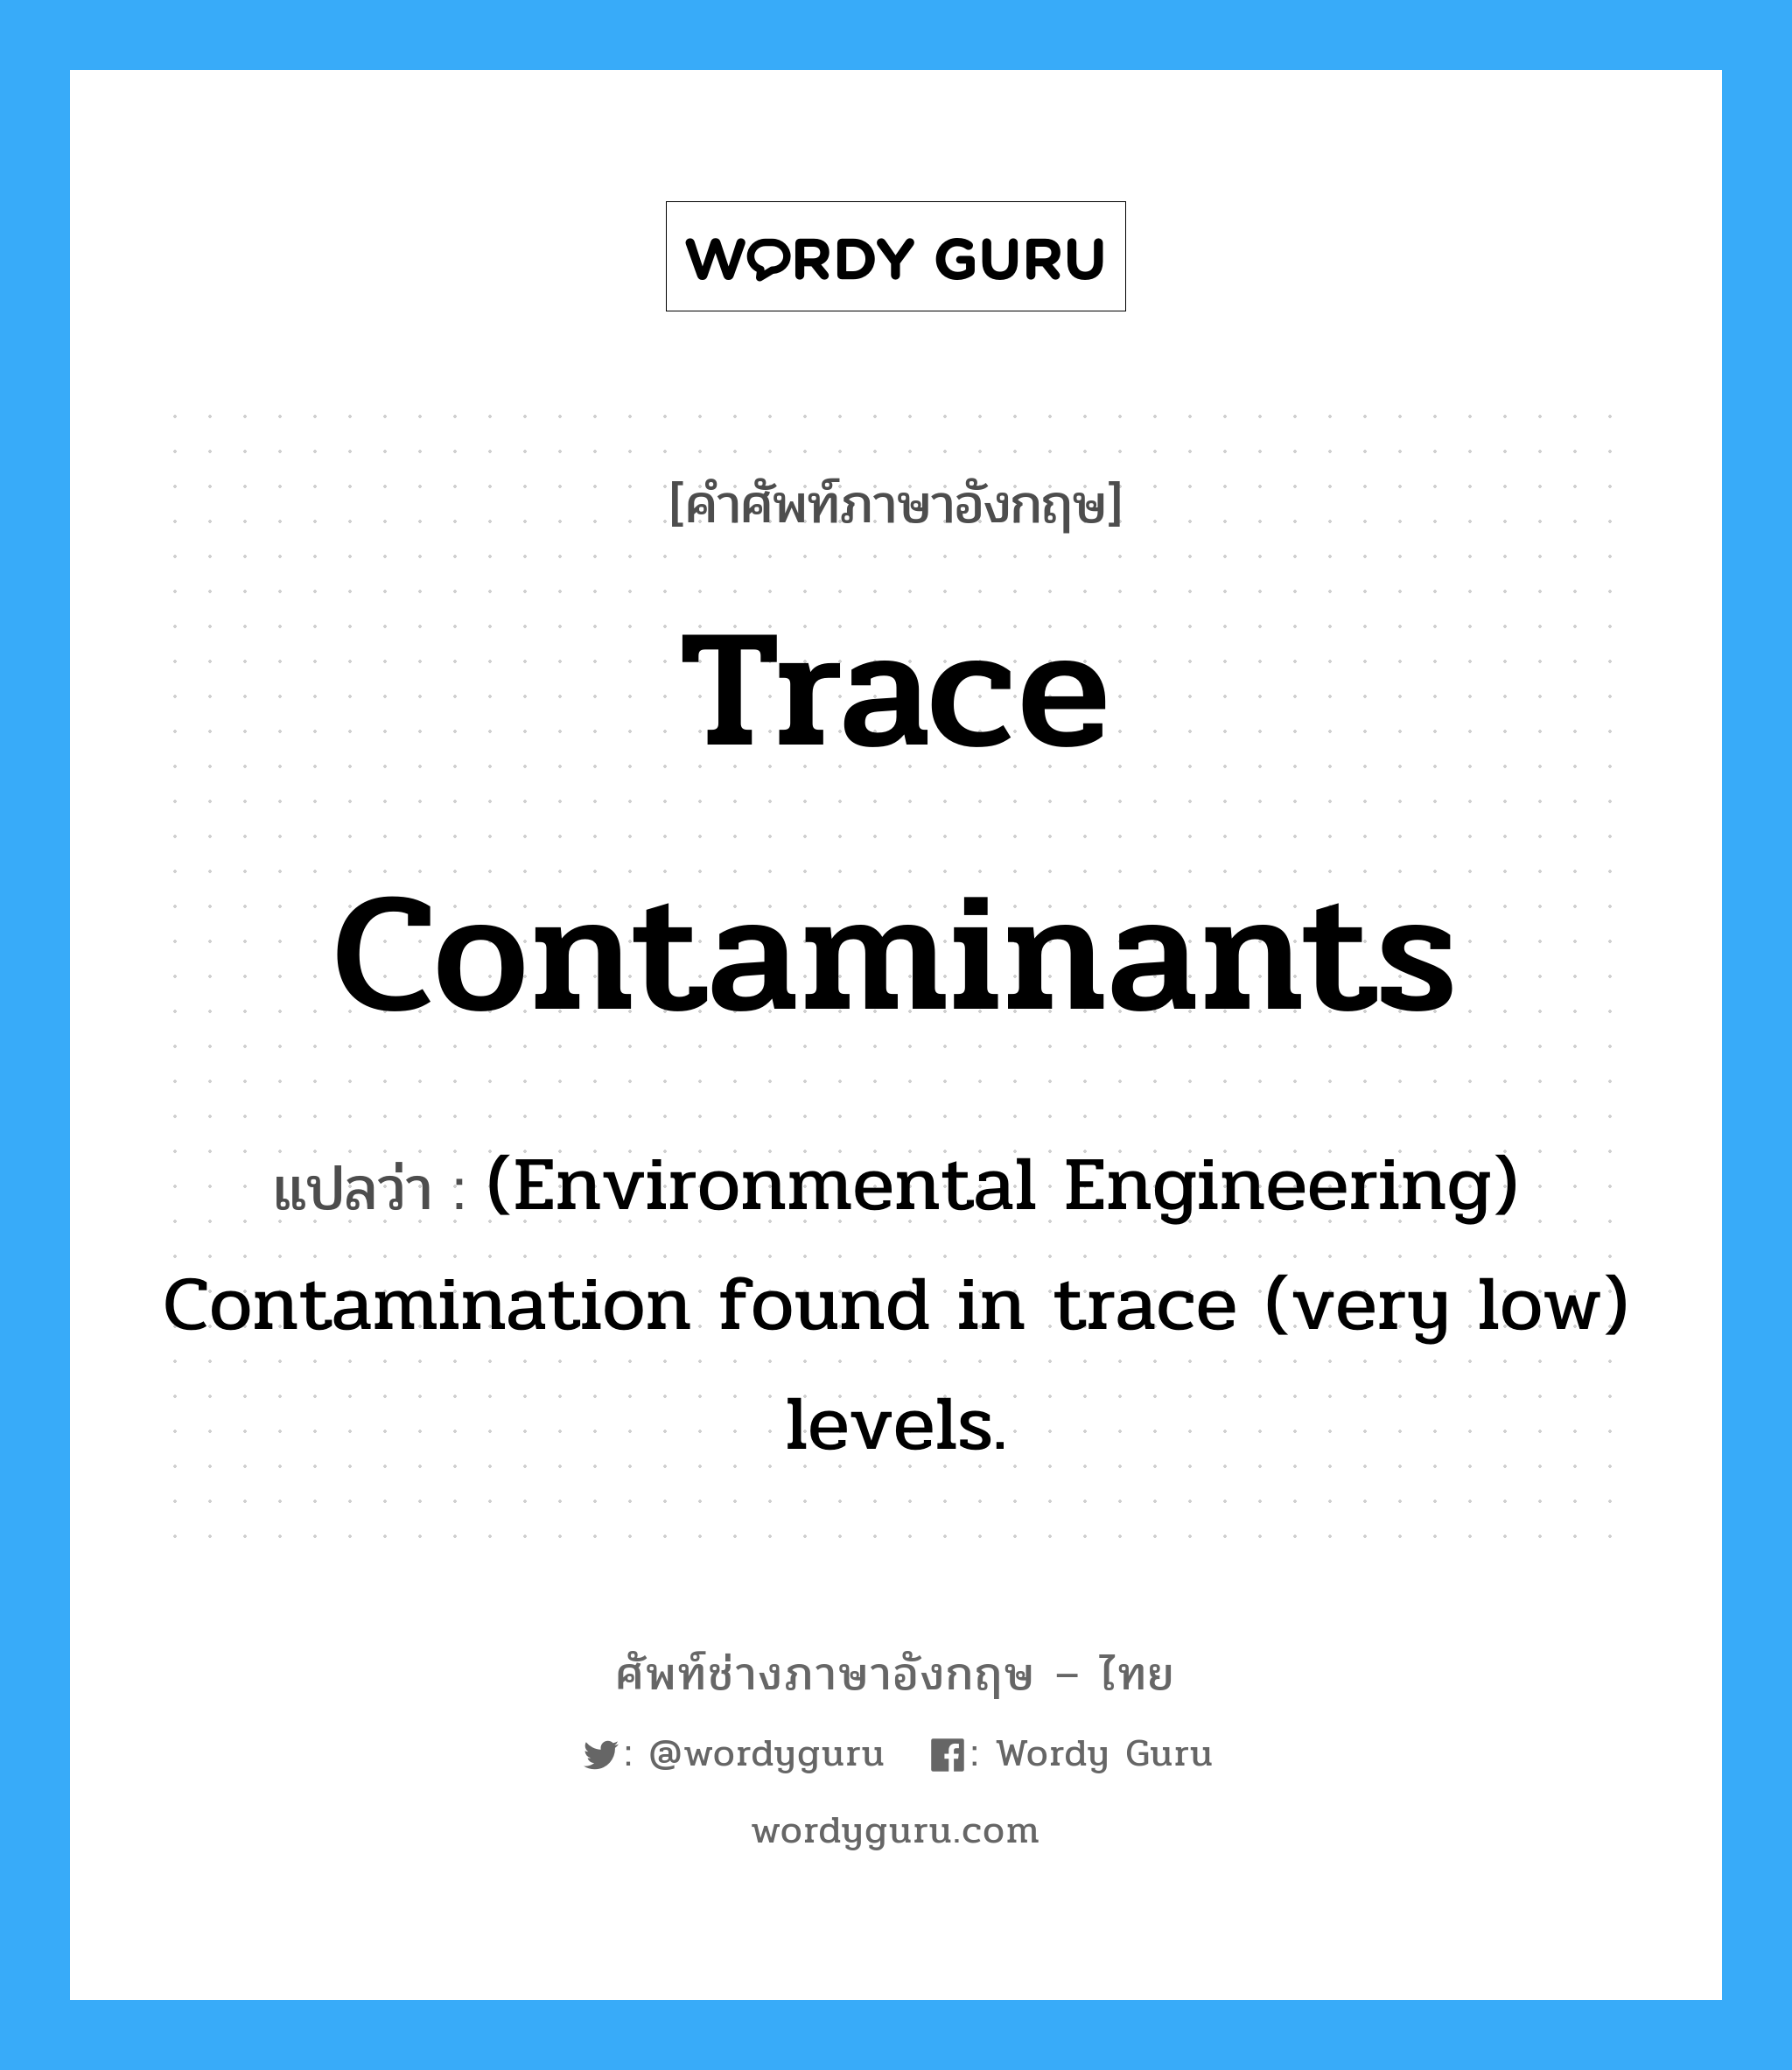 (Environmental Engineering) Contamination found in trace (very low) levels. ภาษาอังกฤษ?, คำศัพท์ช่างภาษาอังกฤษ - ไทย (Environmental Engineering) Contamination found in trace (very low) levels. คำศัพท์ภาษาอังกฤษ (Environmental Engineering) Contamination found in trace (very low) levels. แปลว่า Trace contaminants